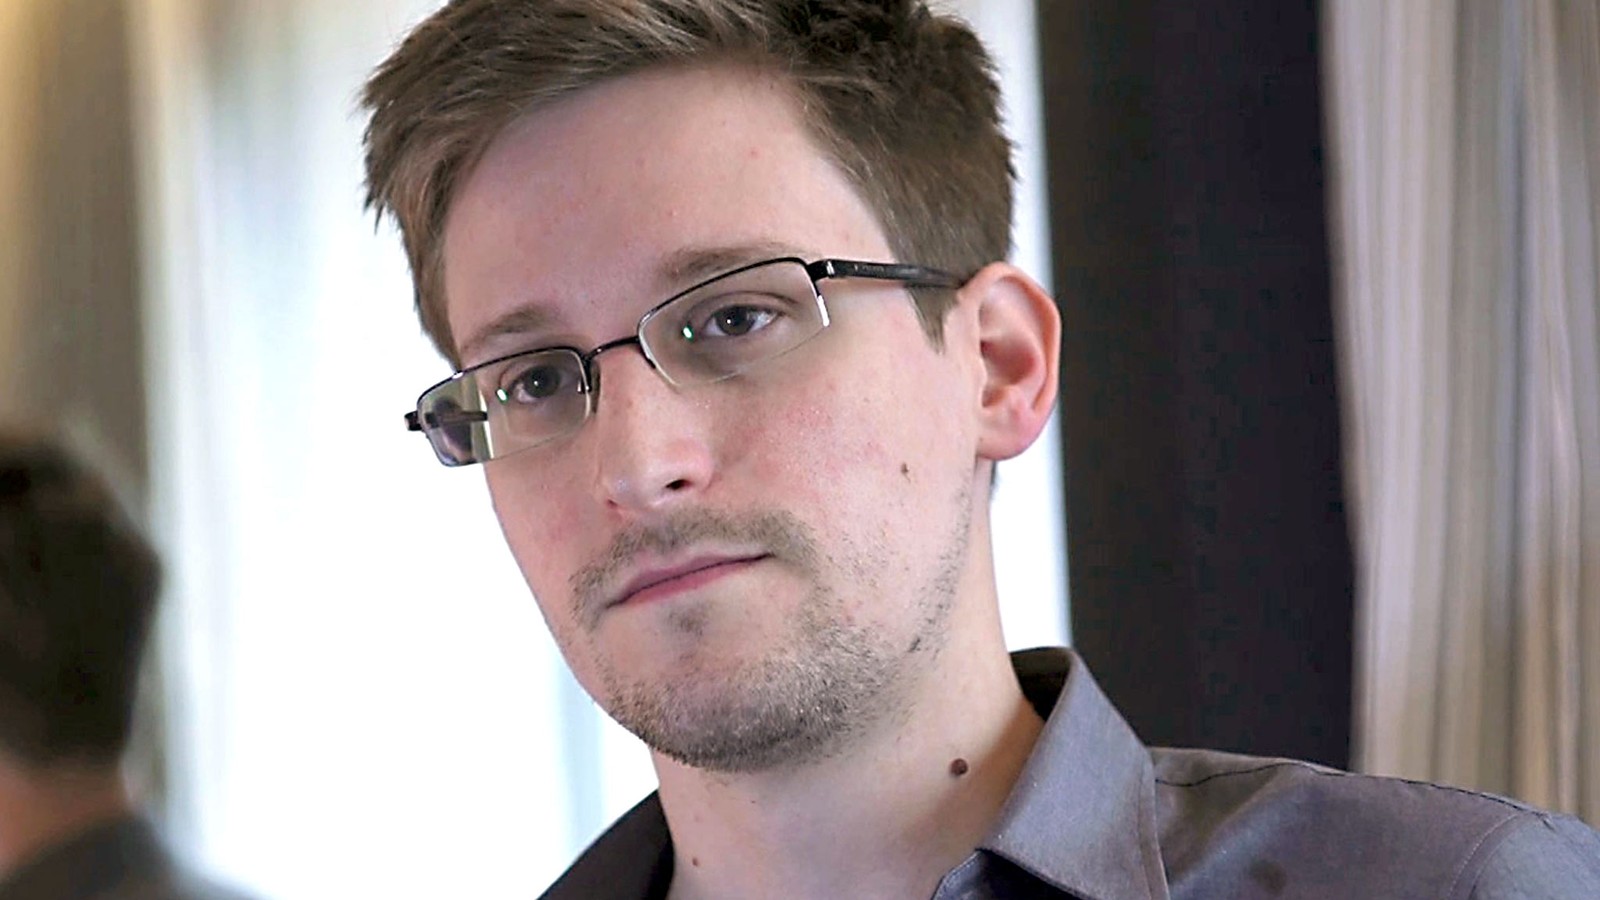 Former U.S. spy agency contractor Edward Snowden is interviewed by The Guardian in his hotel room in Hong Kong&#8230;Former U.S. spy agency contractor Edward Snowden is seen in this still image taken from video during an interview by The Guardian in his hotel room in Hong Kong June 6, 2013. Snowden was on July 24, 2013 granted documents that will allow him to leave a Moscow airport where he is holed up, an airport source said on Wednesday. The official, who spoke on condition of anonymity, said Snowden, who is wanted by the United States for leaking details of U.S. government intelligence programmes, was expected to meet his lawyer at Sheremetyevo airport later on Wednesday after lodging a request for temporary asylum in Russia. The immigration authorities declined immediate comment. Picture taken June 6, 2013. MANDATORY CREDIT. REUTERS/Glenn Greenwald/Laura Poitras/Courtesy of The Guardian/Handout via Reuters  (CHINA &#8211; Tags: POLITICS MEDIA)
ATTENTION EDITORS &#8211; THIS IMAGE WAS PROVIDED BY A THIRD PARTY. FOR EDITORIAL USE ONLY. NOT FOR SALE FOR MARKETING OR ADVERTISING CAMPAIGNS. NO SALES. NO ARCHIVES. THIS PICTURE IS DISTRIBUTED EXACTLY AS RECEIVED BY REUTERS, AS A SERVICE TO CLIENTS. NO THIRD PARTY SALES. NOT FOR USE BY REUTERS THIRD PARTY DISTRIBUTORS. MANDATORY CREDIT
.cbad img {margin: 0!important;}   Reklama     